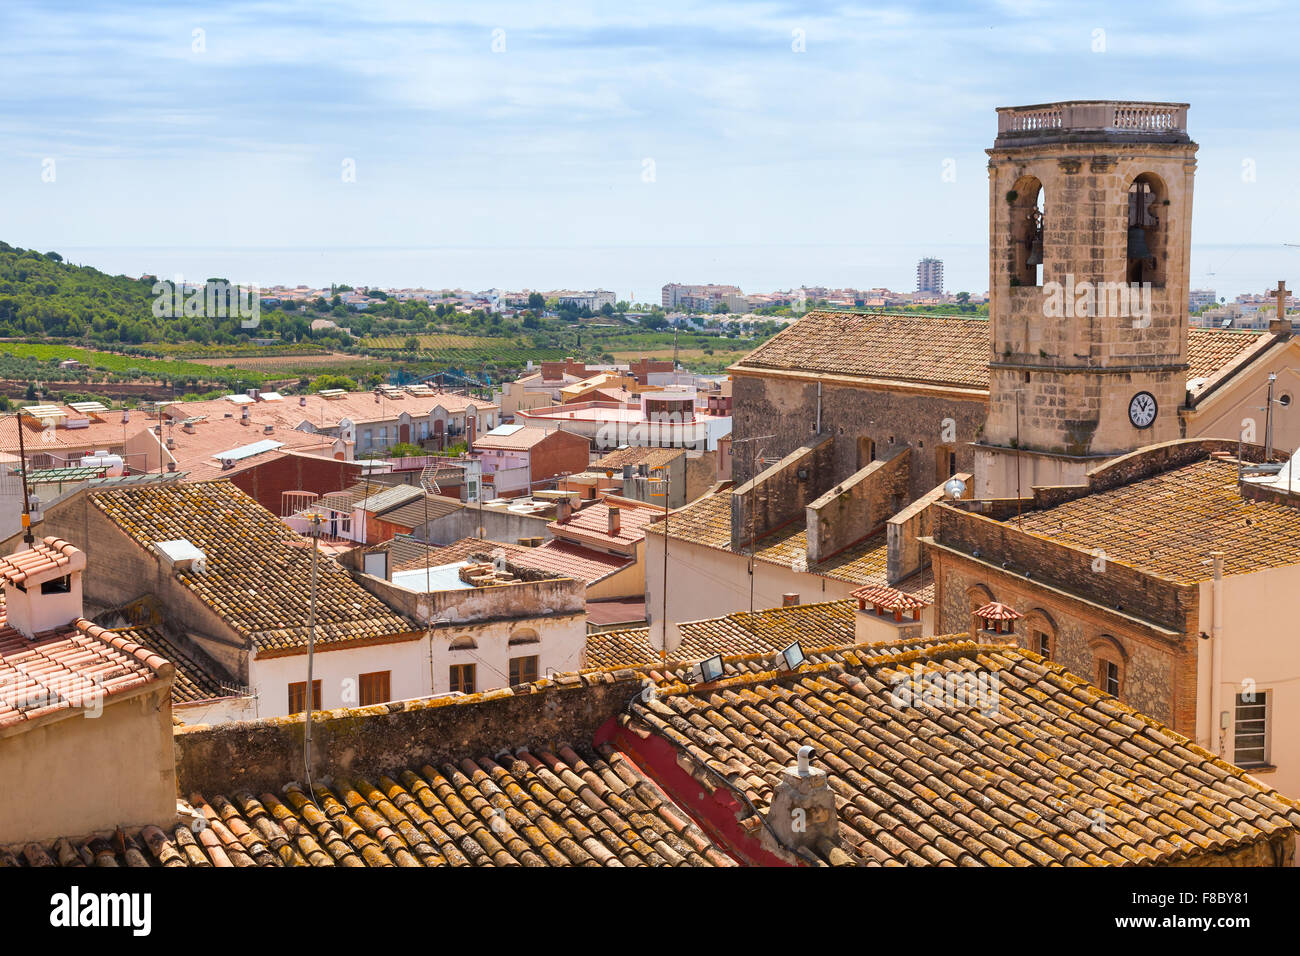 Cityscape of Spanish resort town Calafell in summer, tiling roofs in old part of town Stock Photo